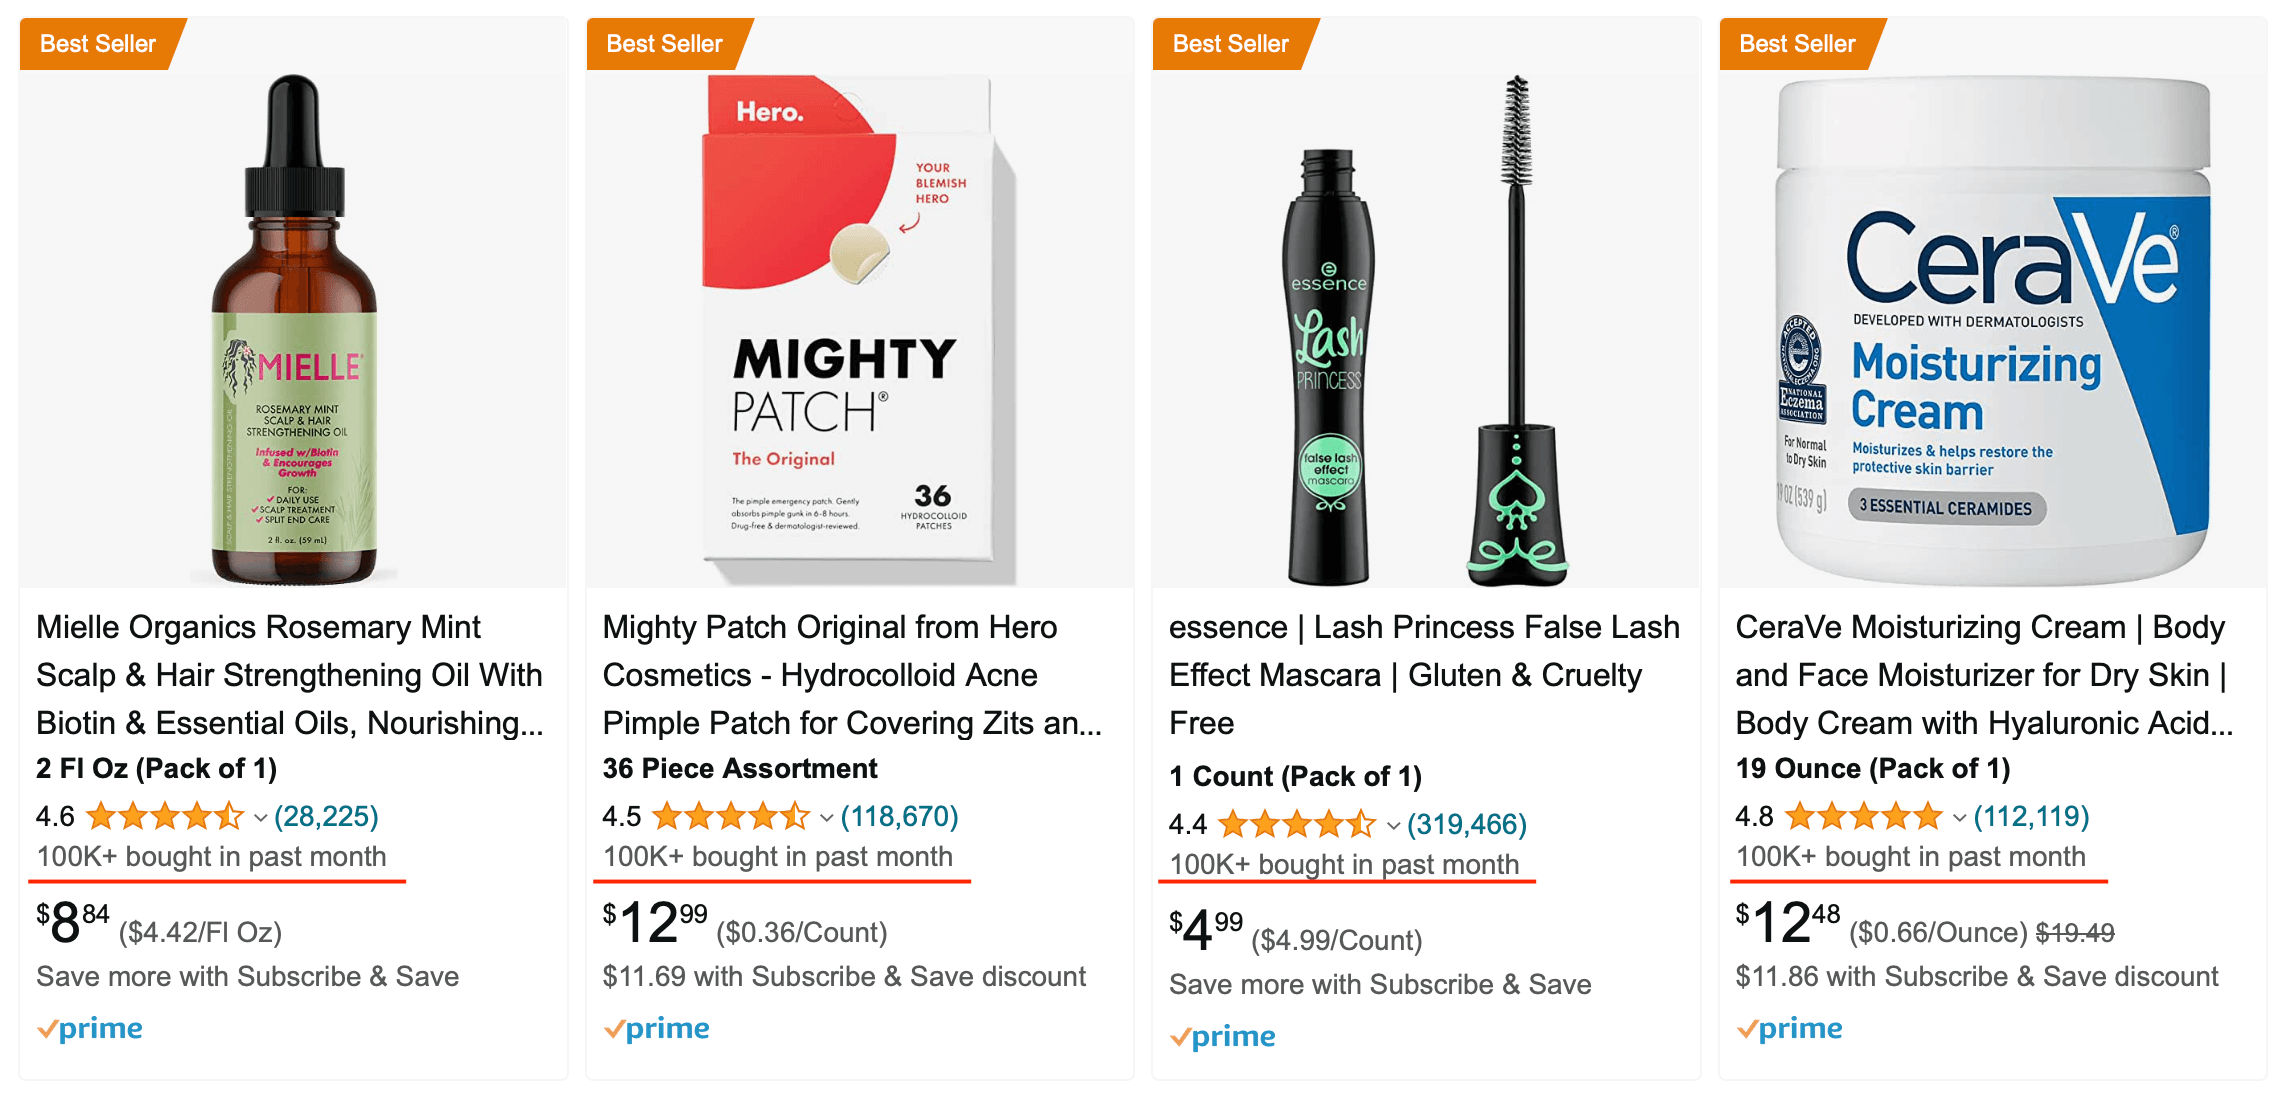 Amazon search results with '100K+ bought in past month' label